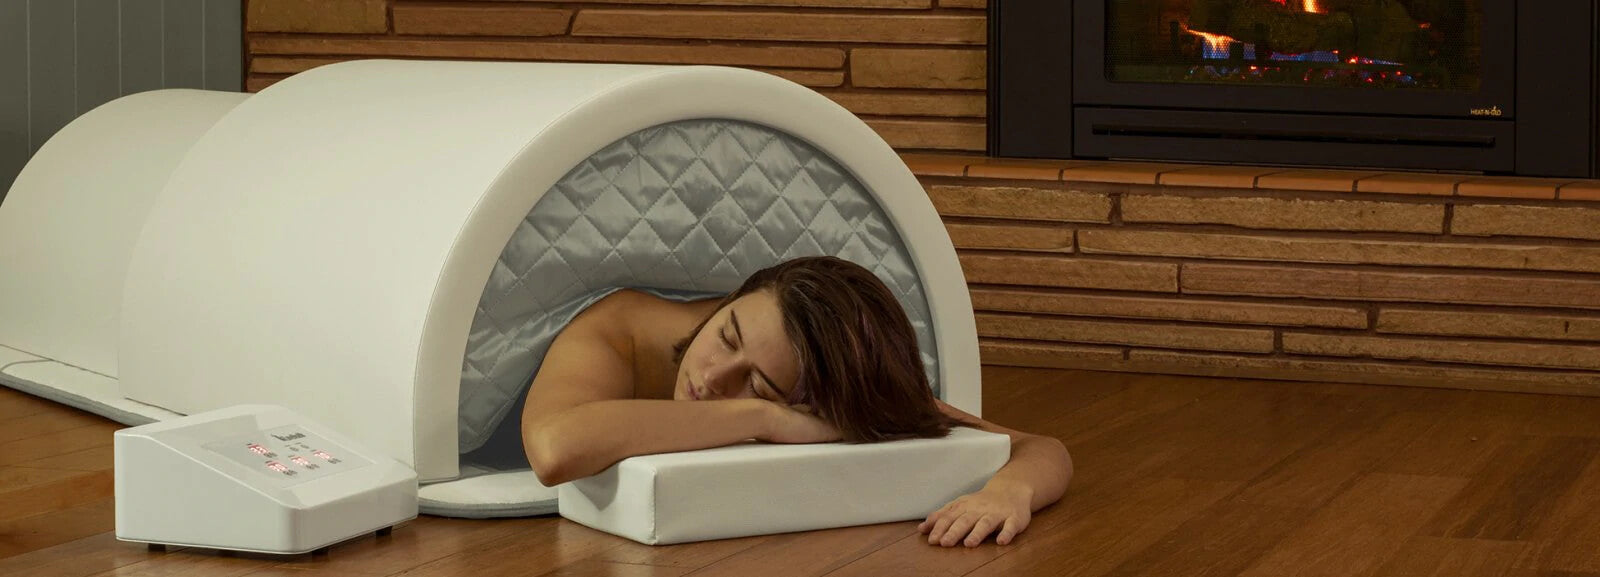 Woman enjoying a 1Love sauna on a hardwood floor in front of a fireplace